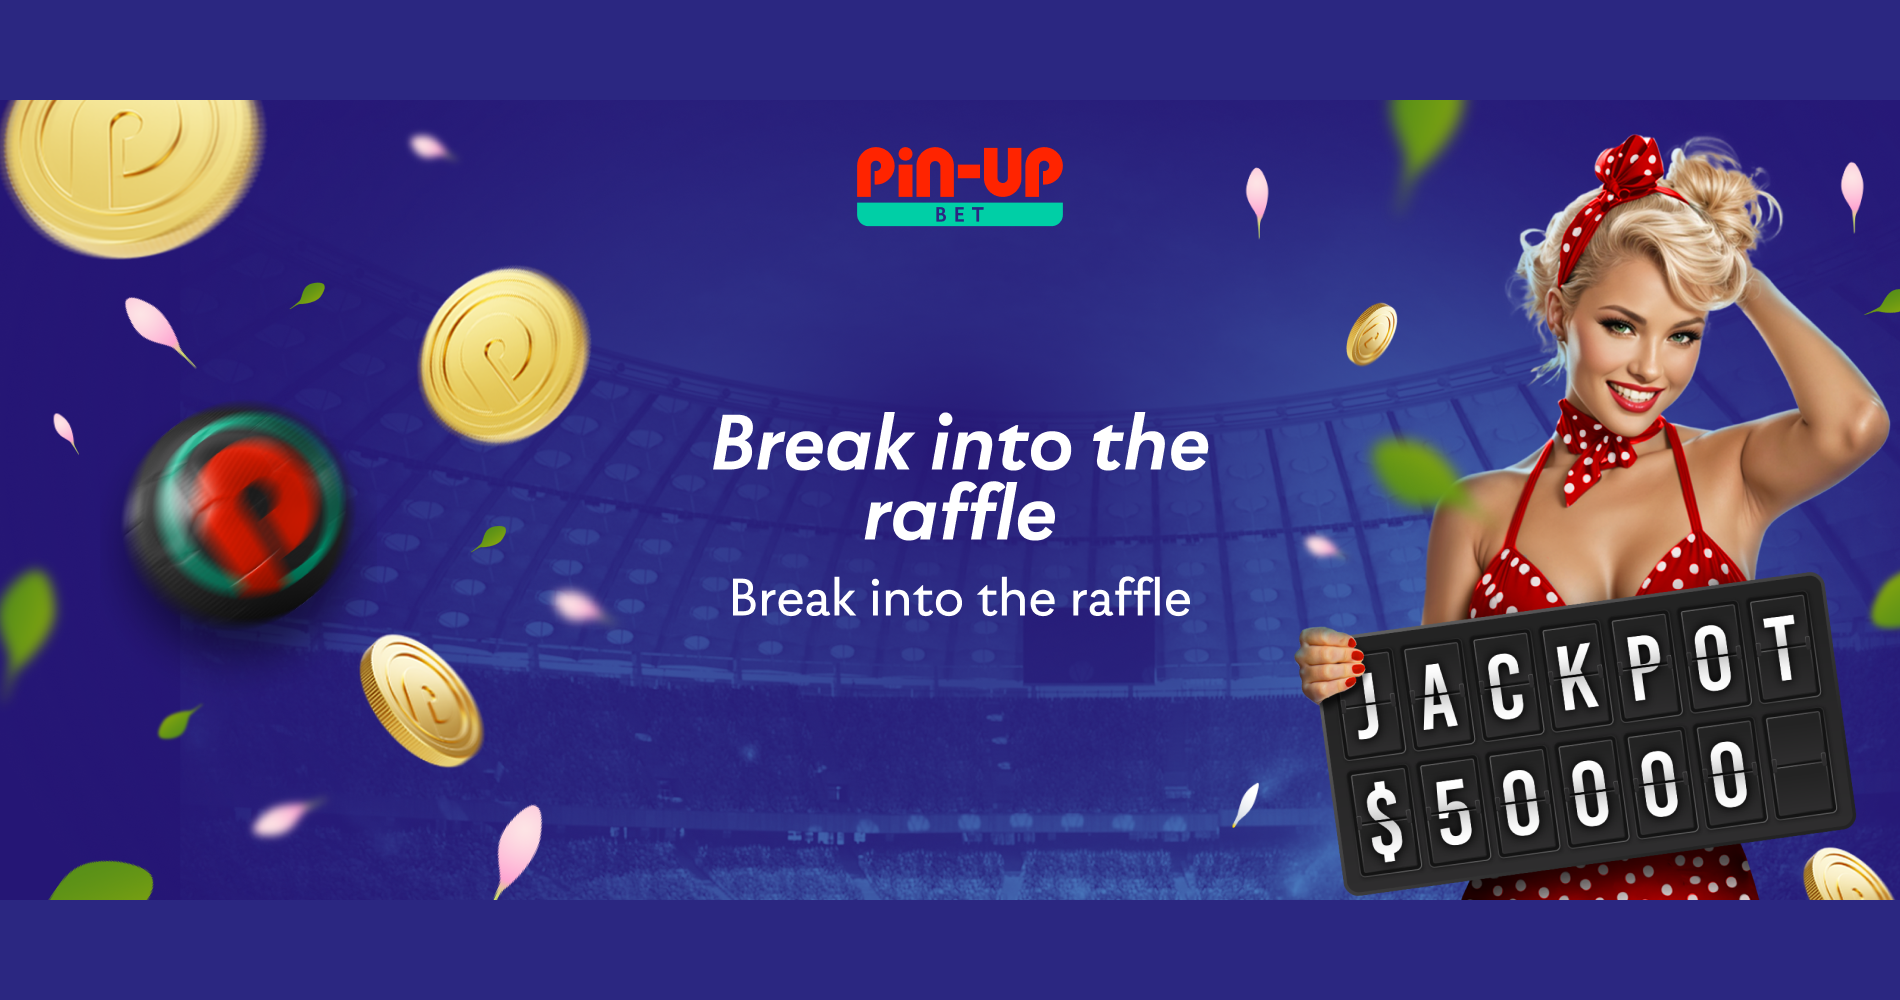 Pin Up India Spring Jackpot Promotion: Wager on Sports events & Claim a Share of $50,000 Cash Jackpot